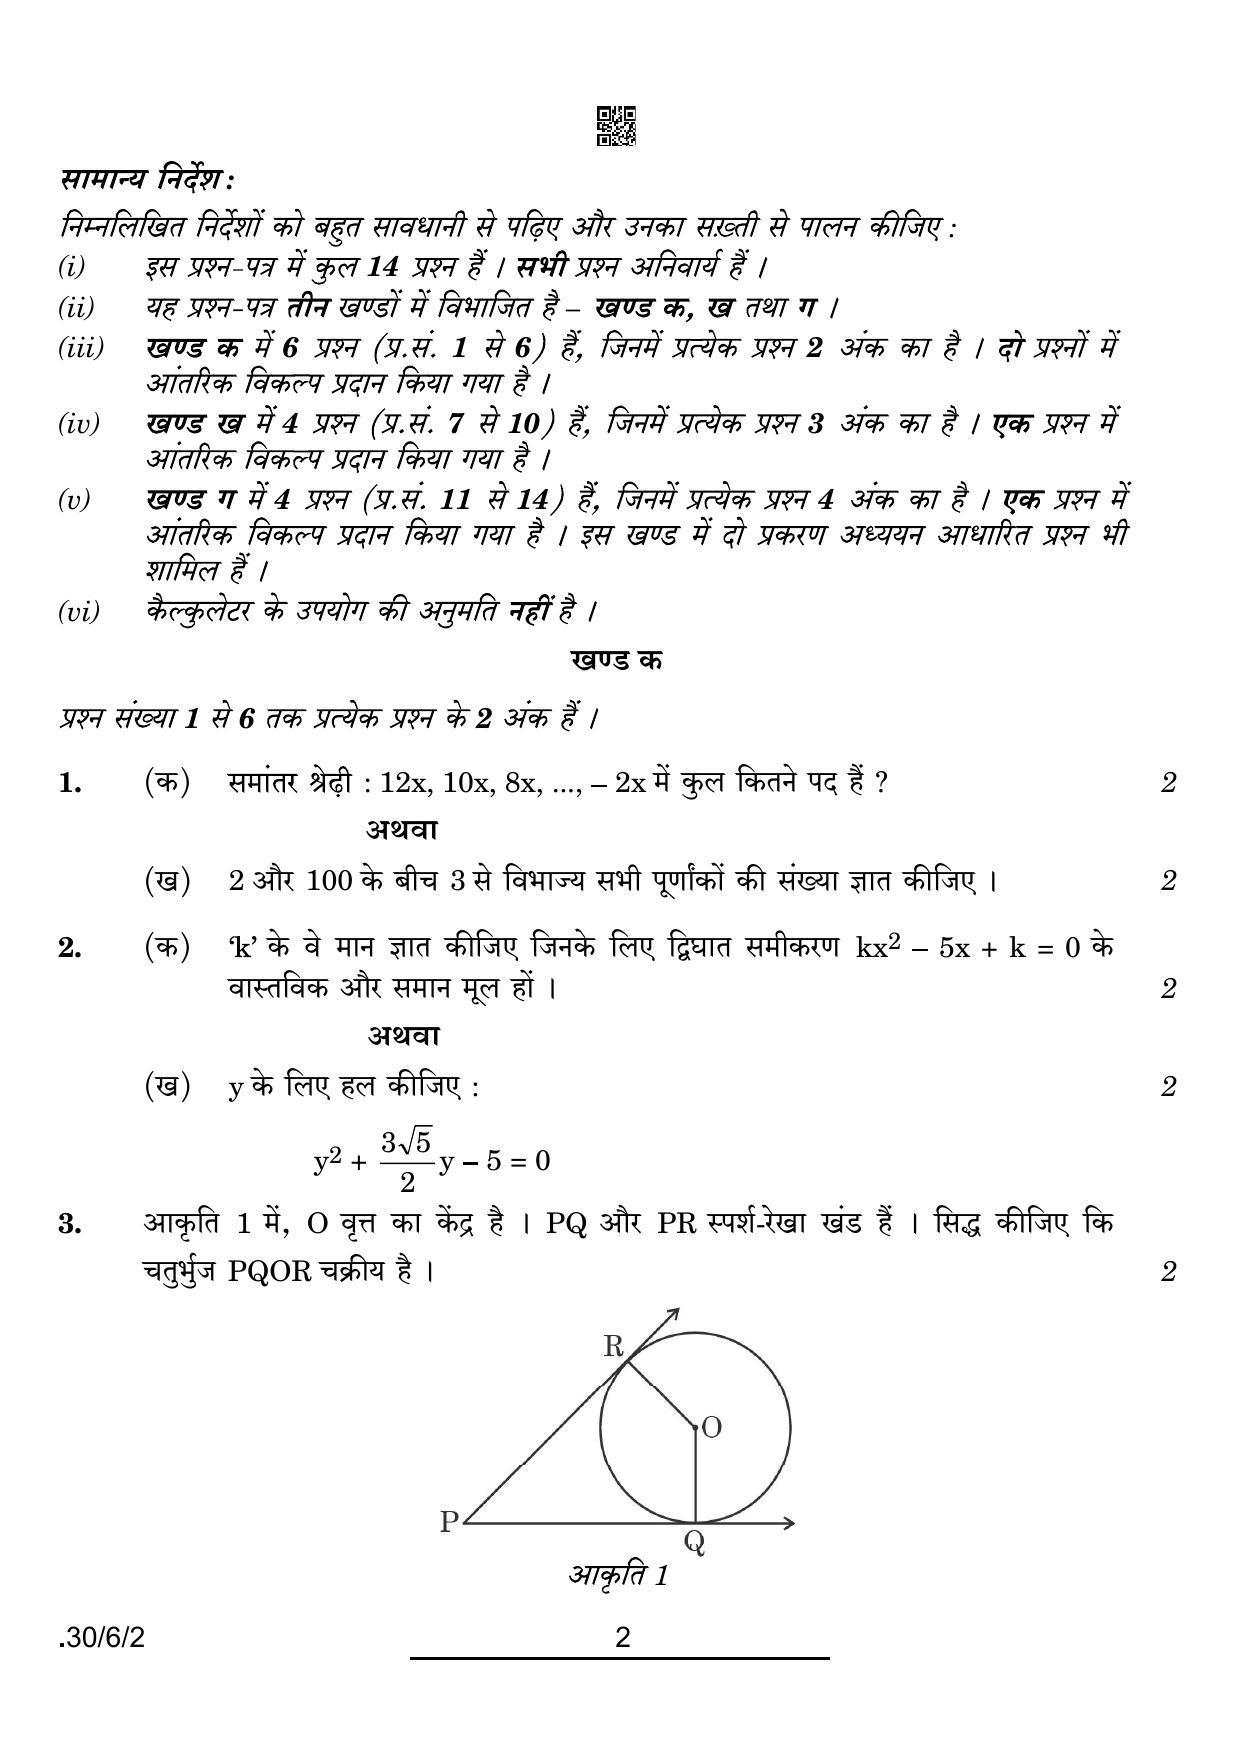 CBSE Class 10 30-6-2 Maths Std. 2022 Compartment Question Paper - Page 2